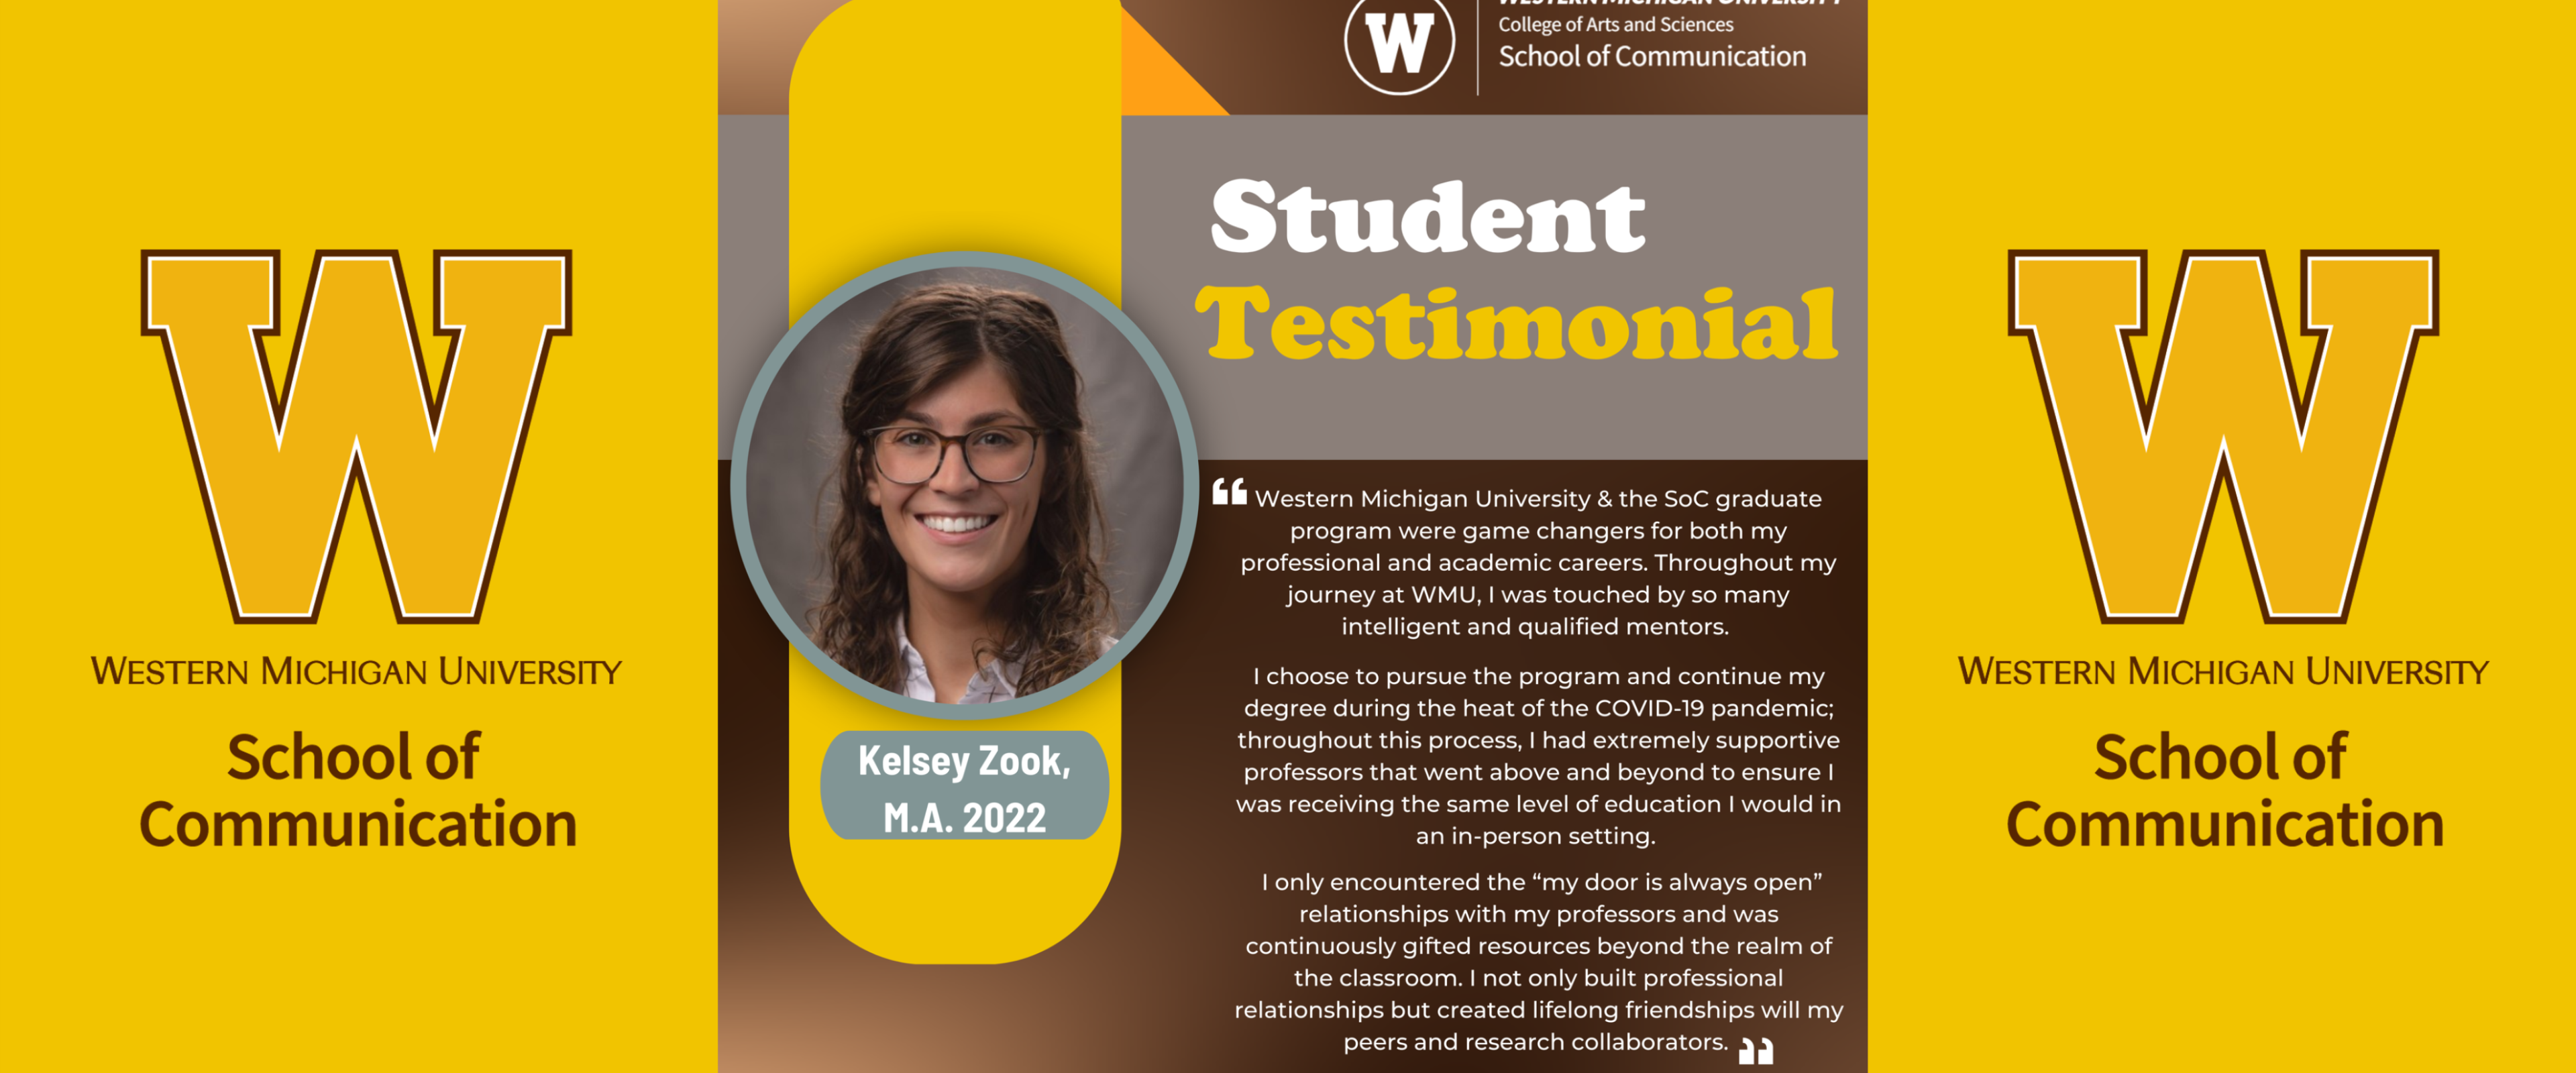 Student Testimonial of Kelsey Zook: Western Michigan University & the School of Communication graduate program were game changers for both my professional and academic careers. Throughout my journey at WMU, I was touched by so many intelligent and qualified mentors. I chose to pursue the program and continue my degree during the heat of the COVID-19 pandemic; throughout this process, I had extremely supportive professors that went above and beyond to ensure I had a great education.